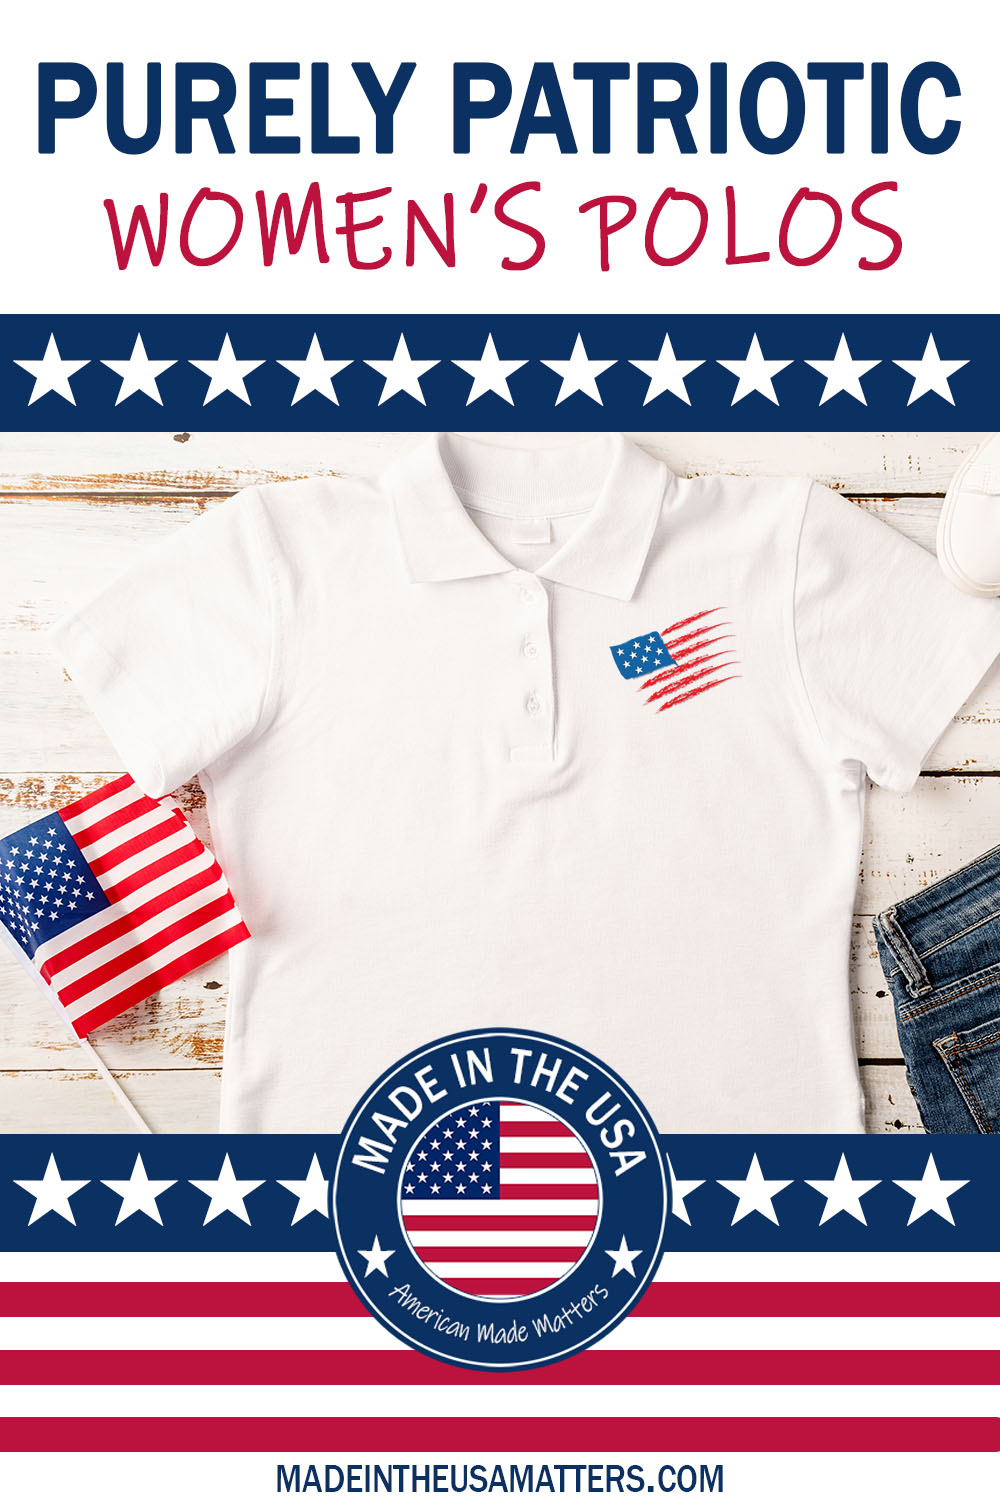 Women's Patriotic Polo Shirts Made in the USA | Purely Patriotic ...